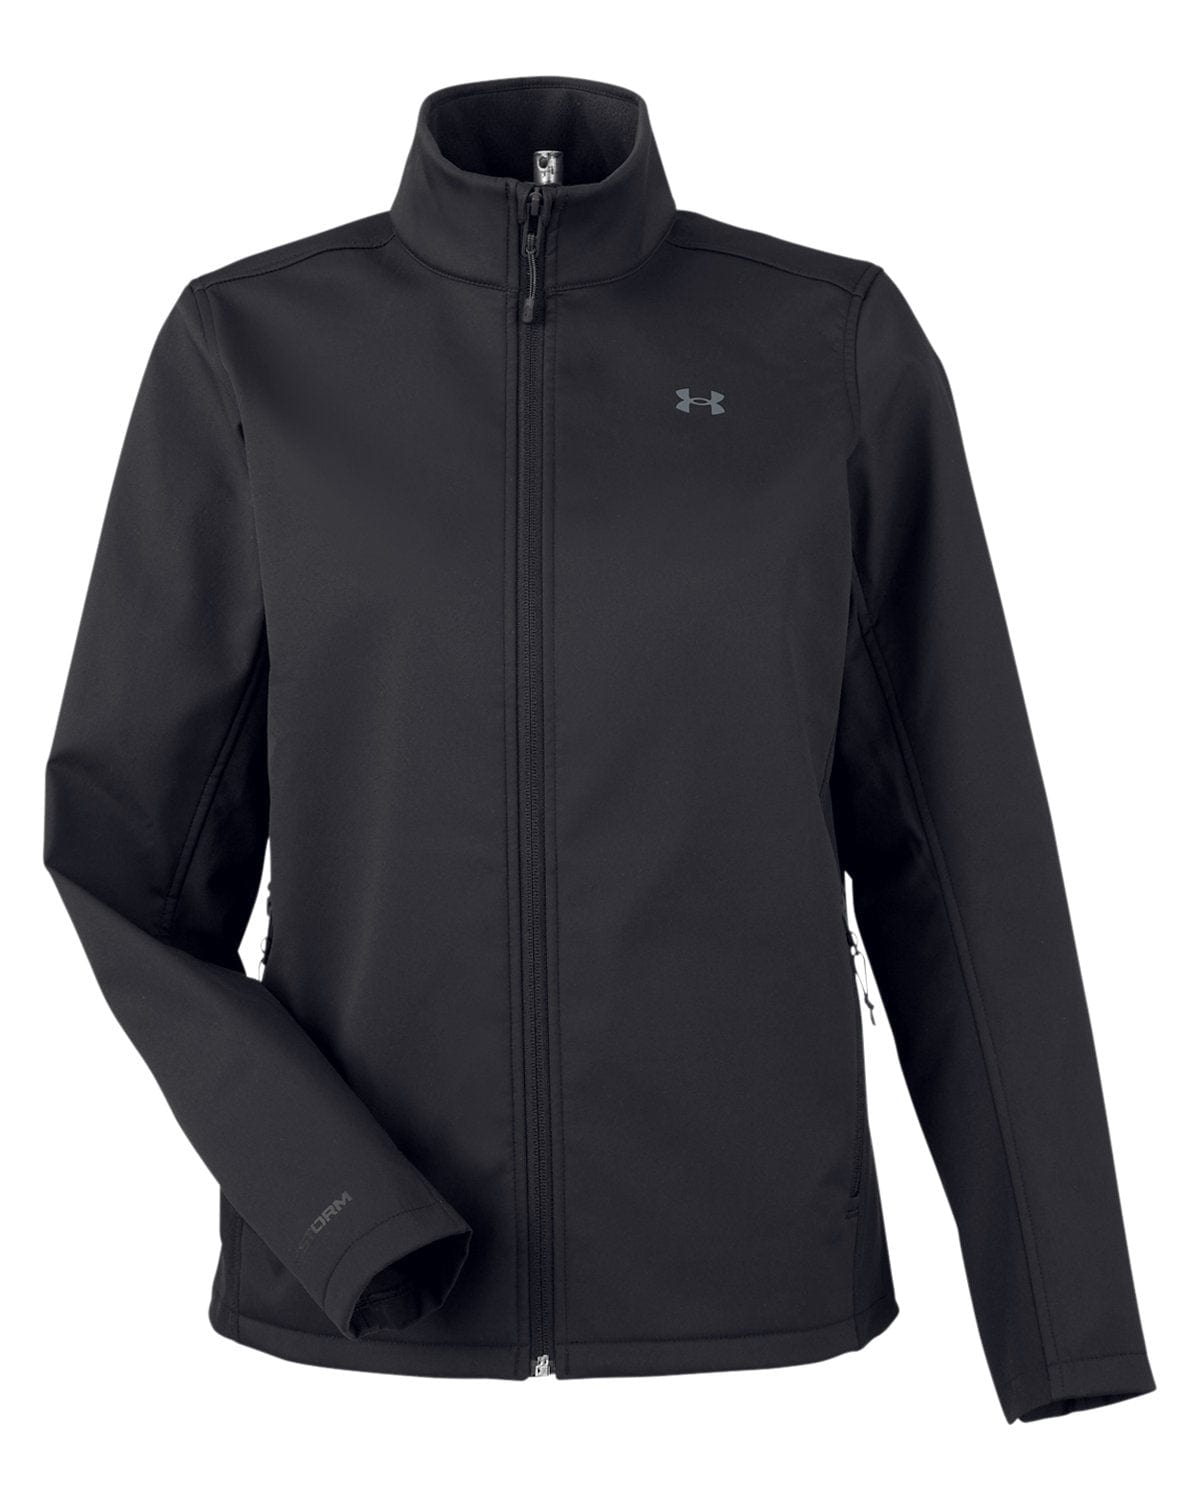 Under Armour Storm ColdGear Infrared Shield 2.0 Jacket for Ladies -  Black/Pitch Gray - XL in 2023